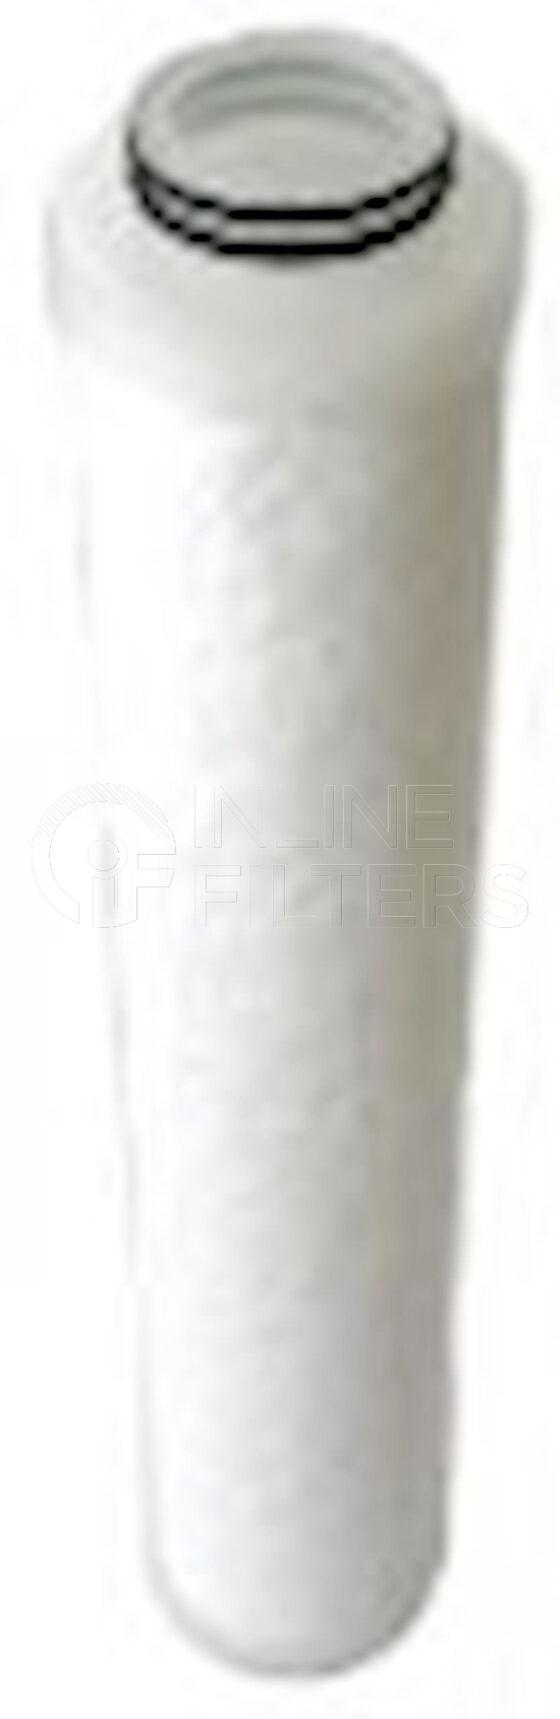 Inline FW90100. Water Filter Product – Brand Specific Inline – Undefined Product Water filter product